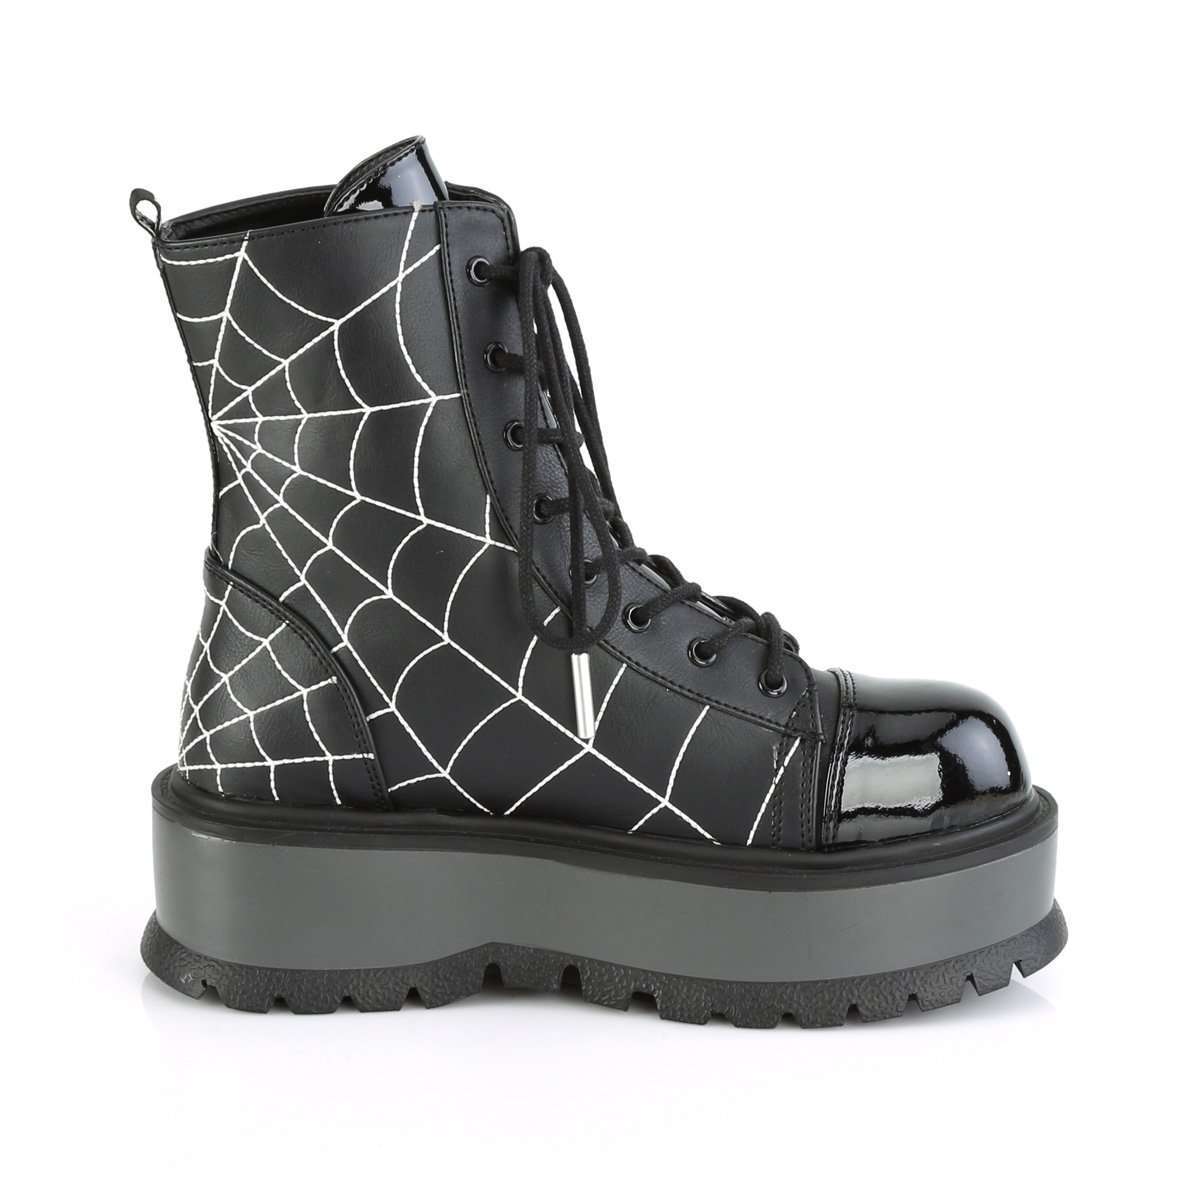 Shoe Strings Hoodie Laces Tiny Bats and Spiderwebs Halloween 